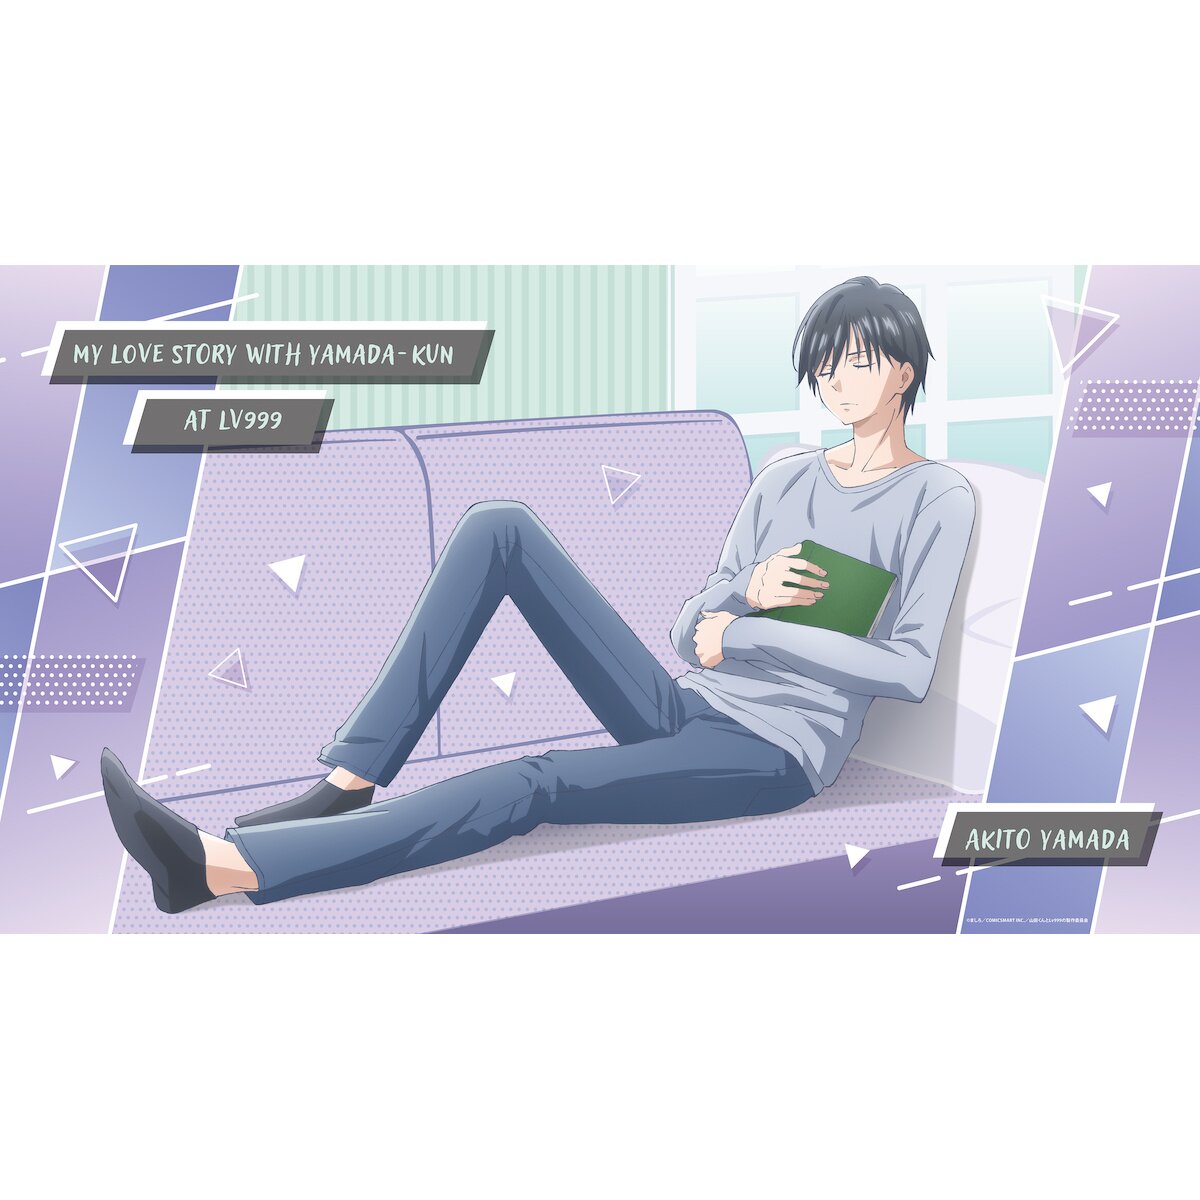  Anime My Love Story with Yamada-kun at Lv999 Poster for Room  Aesthetics Decorative Picture Print Wall Art Canvas Posters Gifts  16x24inch(40x60cm) Unframe-Style: Posters & Prints